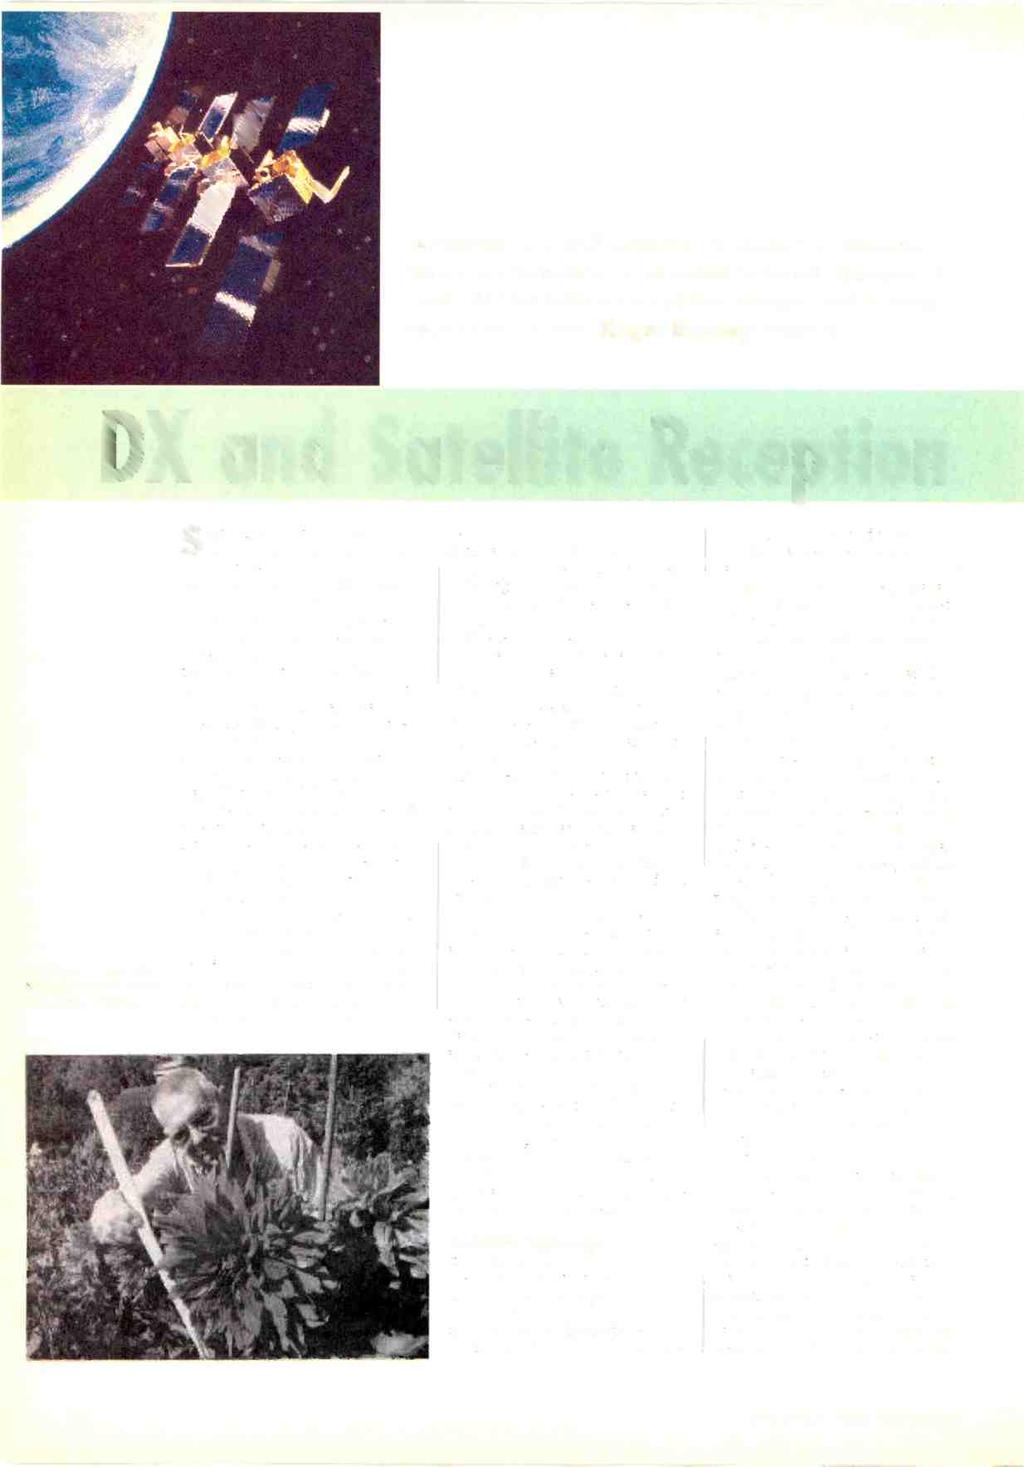 Terrestrial DX and satellite TV reception reports. News on terrestrial and satellite band changes. A neat UHF wideband amplifier design and a book recommendation.